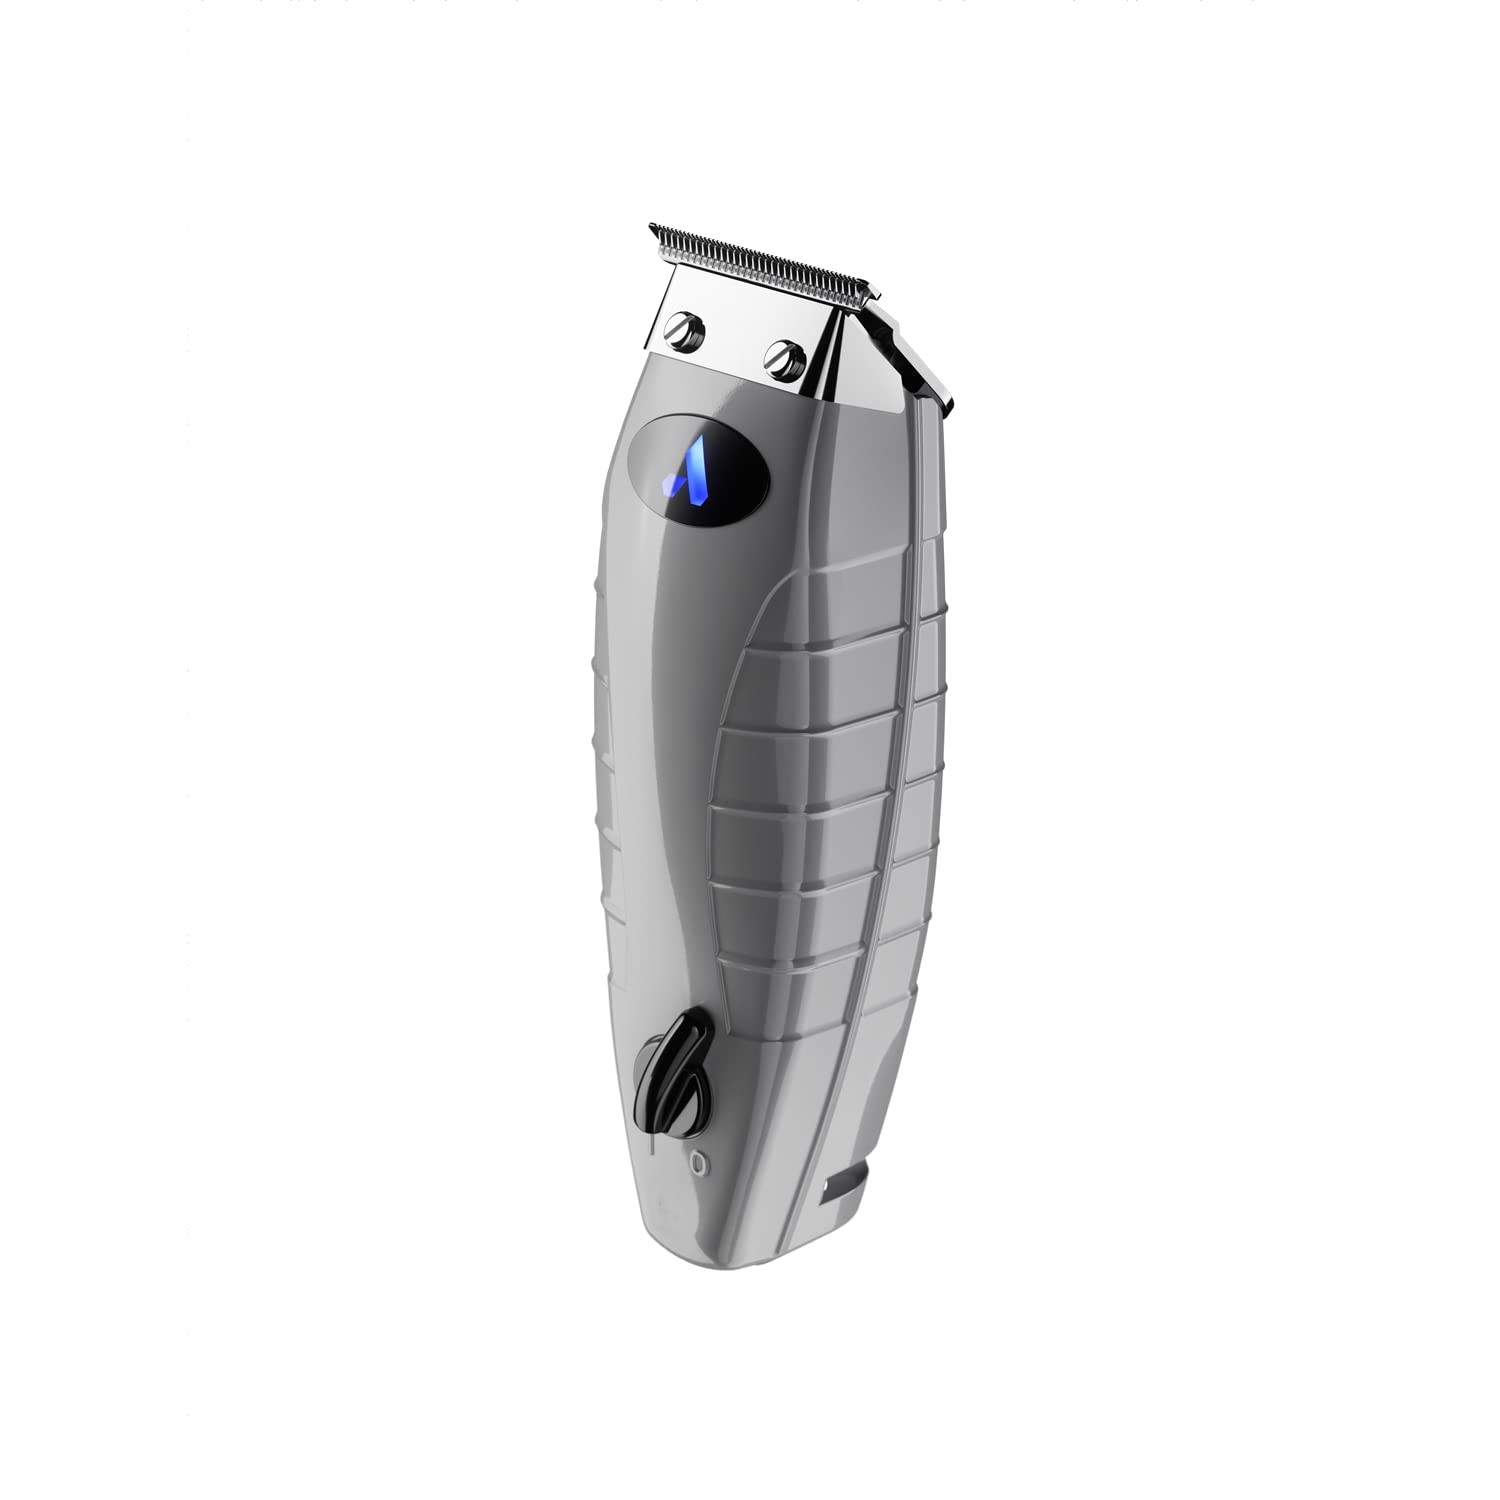 Andis 74055 Professional Corded/Cordless Hair & Beard Trimmer, T-Outliner Blade Trimmer, Zero Gapped, Close Cutting Carbon Steel T-Blade Trimmer, Grey